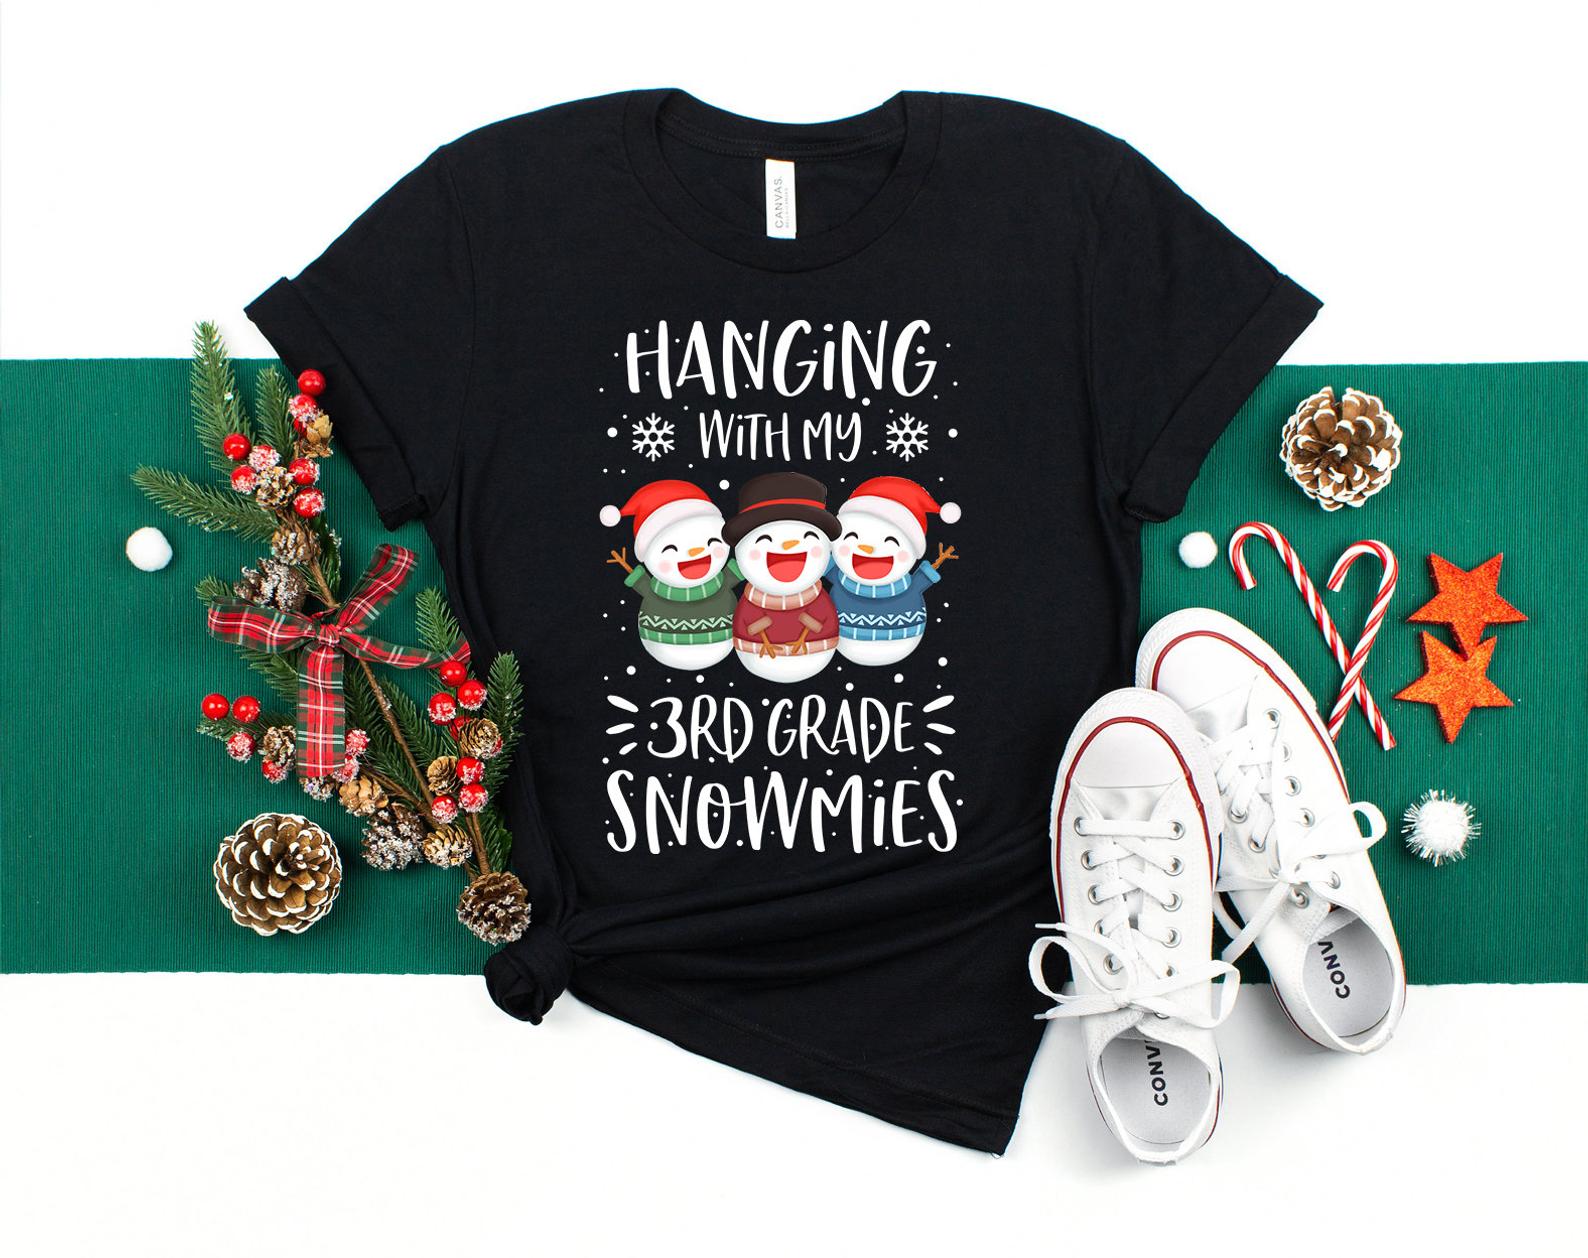 Hanging With My 3rd Grade Snowmies T Shirt Black Unisex S-6XL